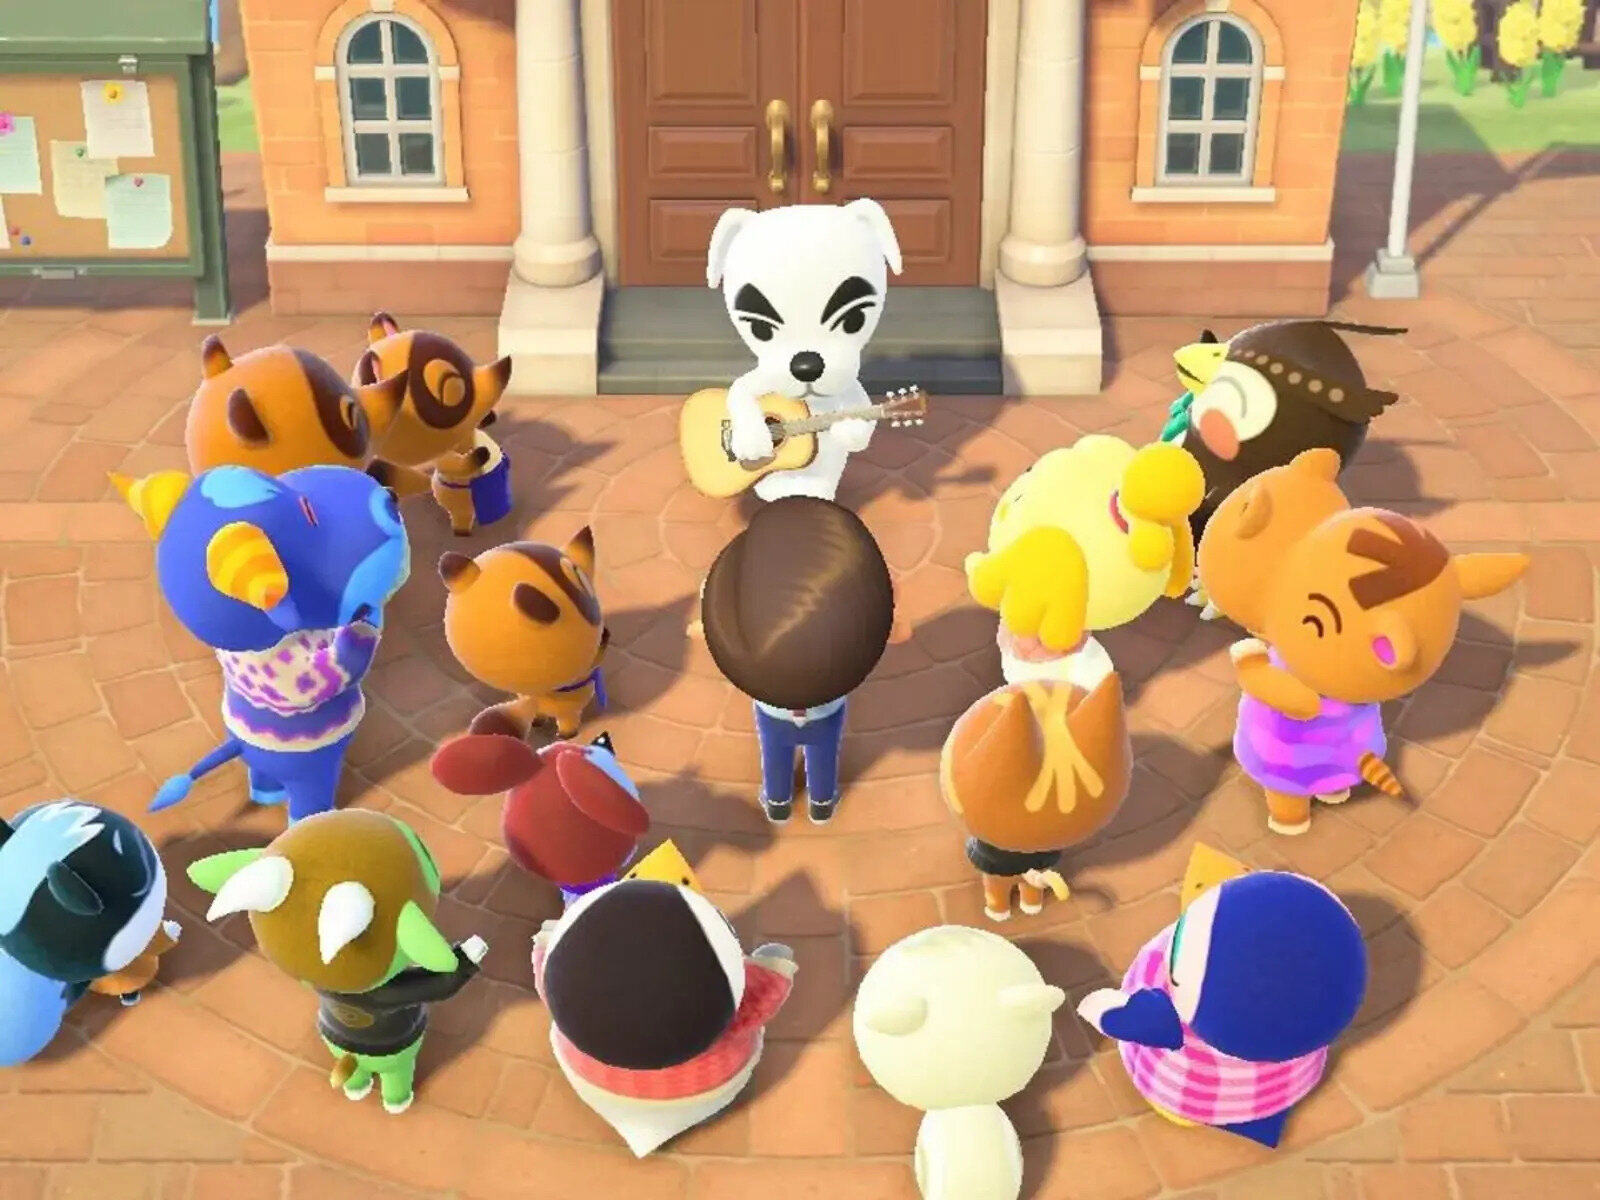 Animal Crossing: New Horizons Review: The Fun Never Ends